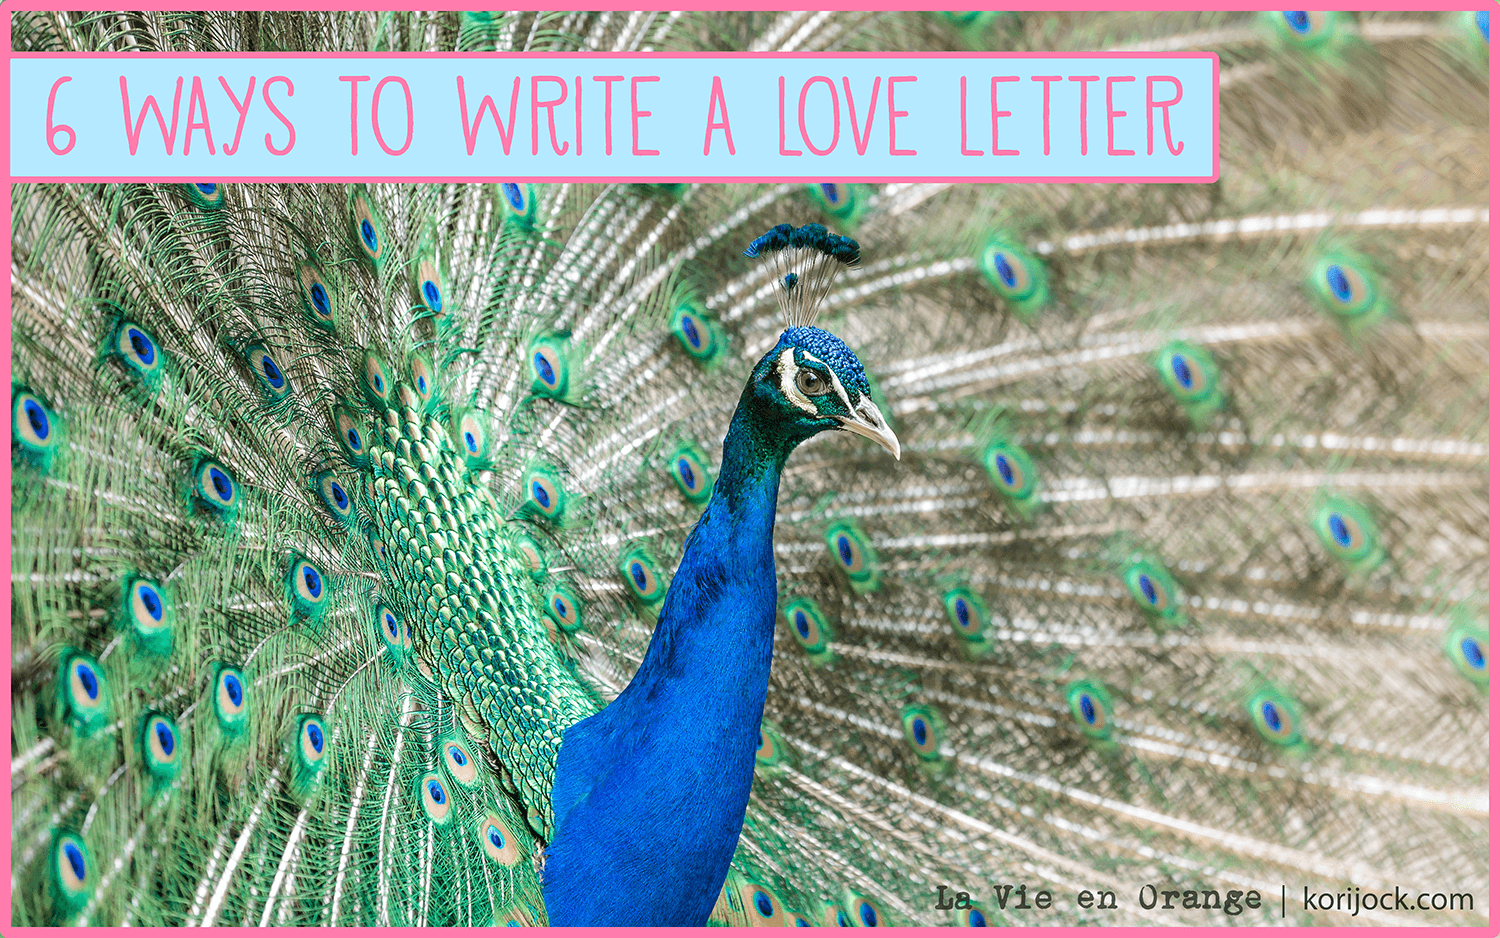 6 ways to write a love letter | La Vie en Orange [a male peacock spreads its green and blue feathers]